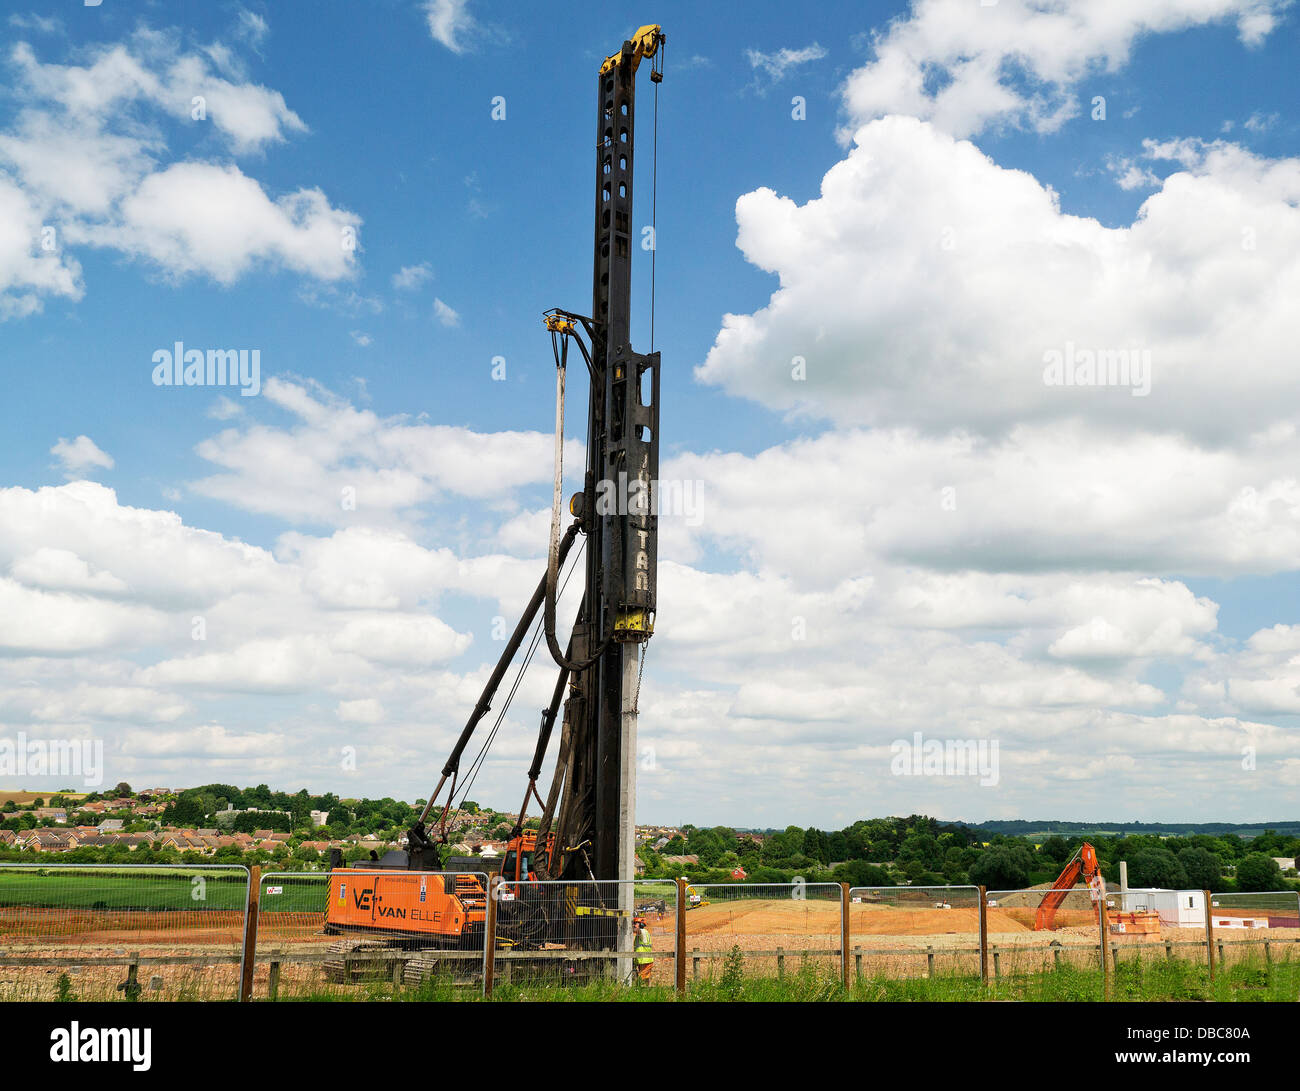 Pile driving on a construction site, Grantham, Lincolnshire, England Stock Photo